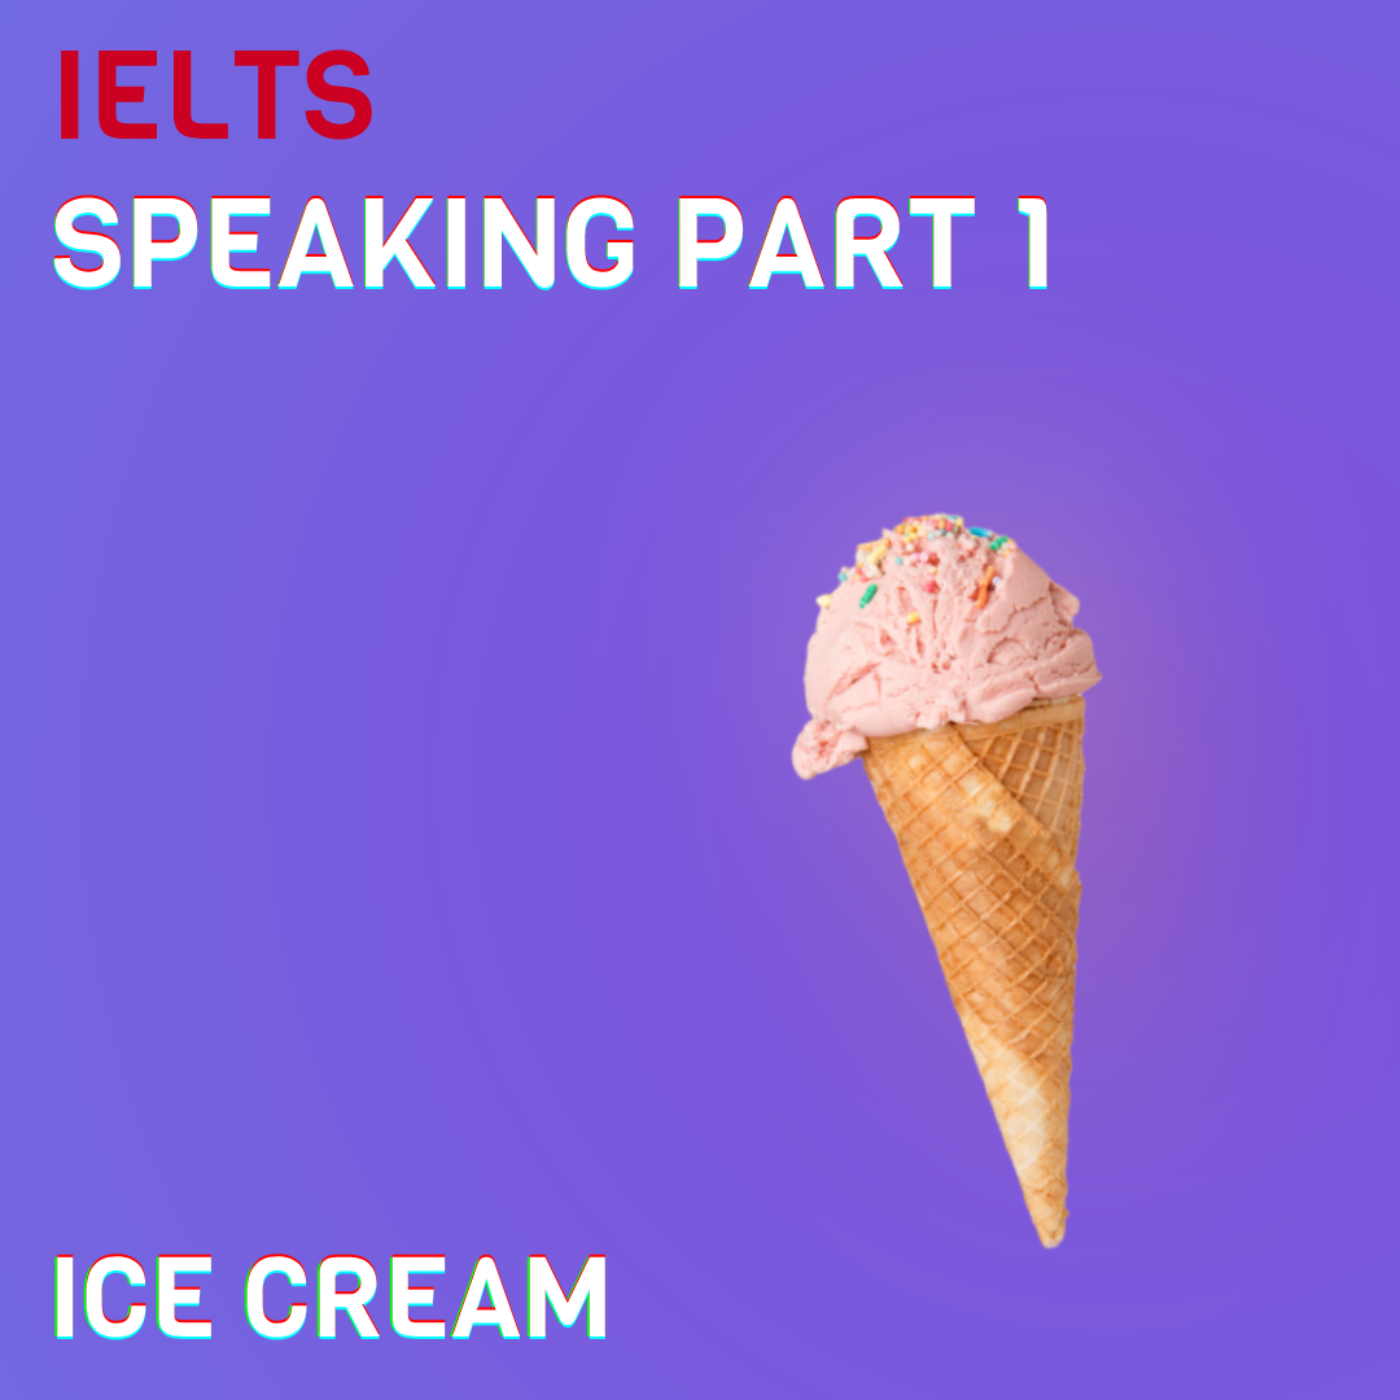 Ielts Speaking Part 1 - Ice Cream (Answers And Vocabulary)